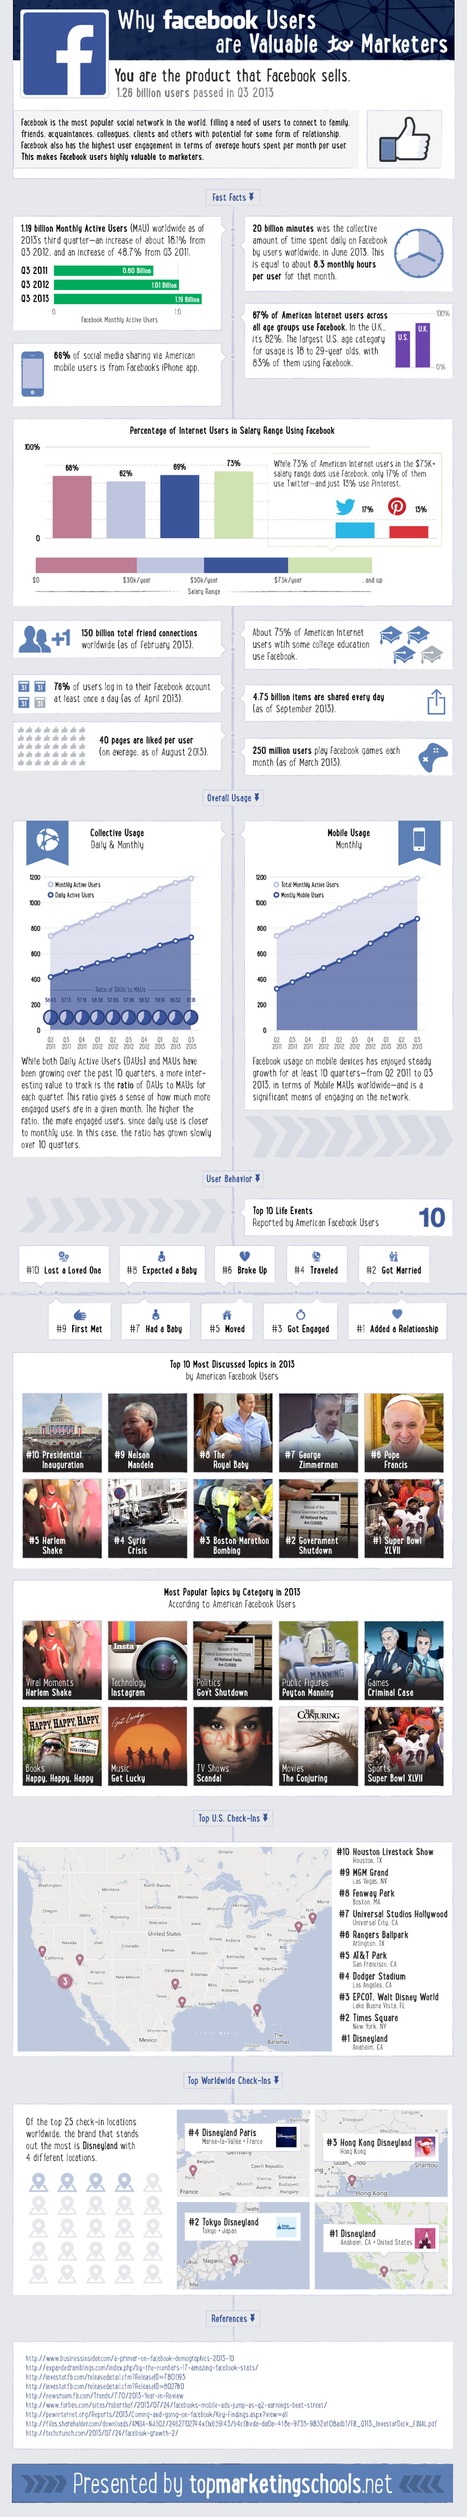 Why Facebook Users Are Valuable to Marketers [INFOGRAPHIC] | Latest Social Media News | Scoop.it